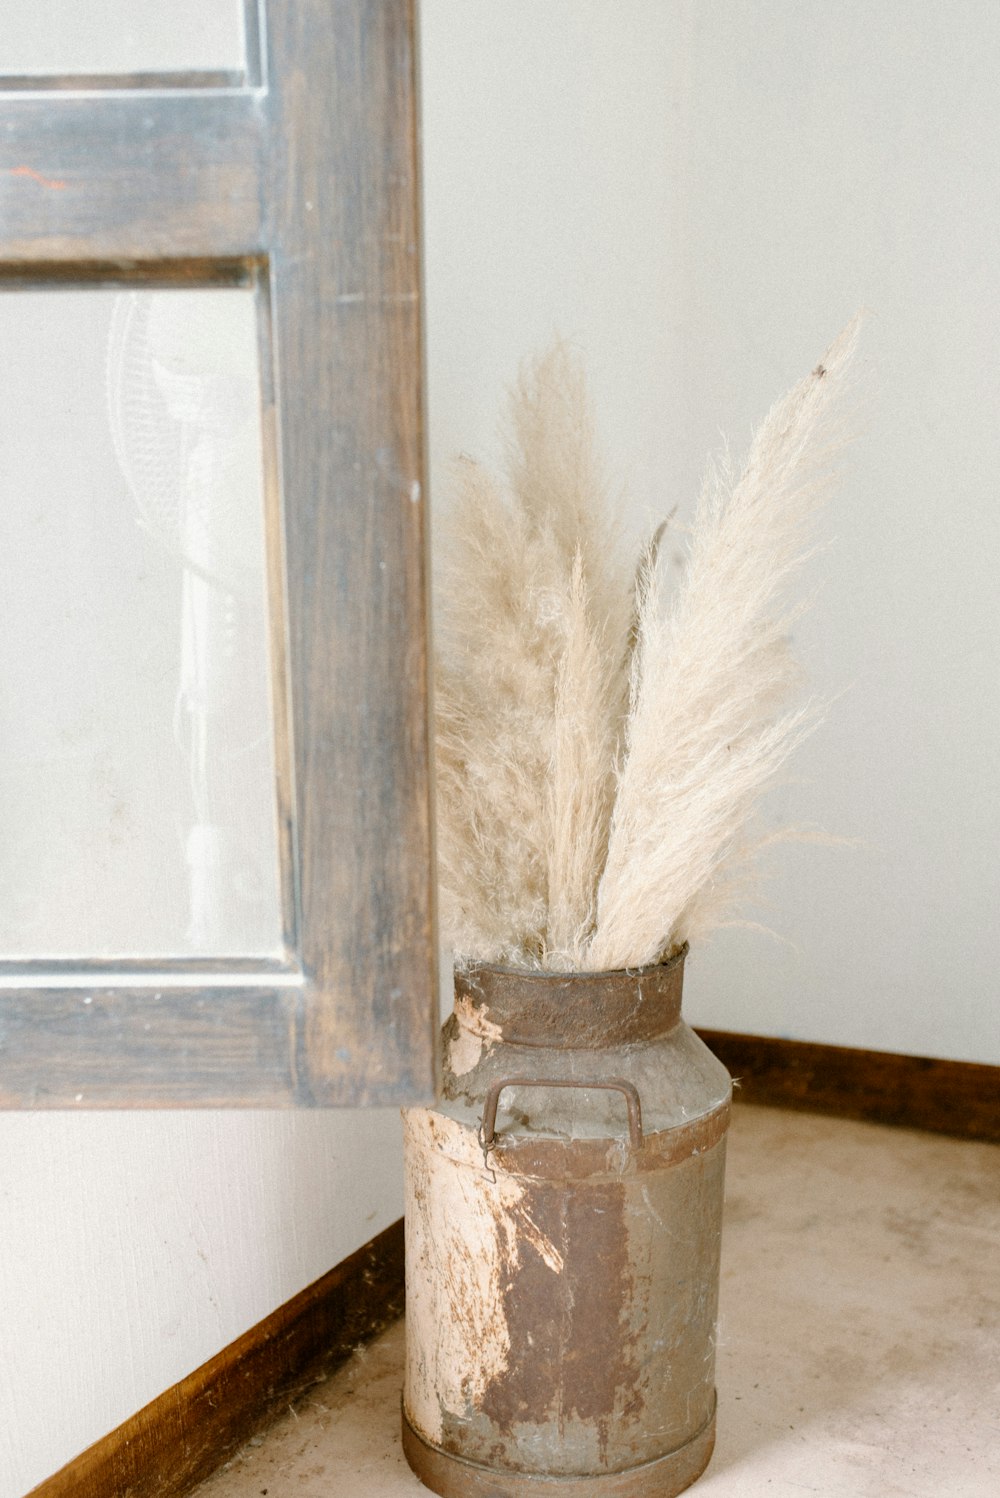 a vase with some white feathers in it